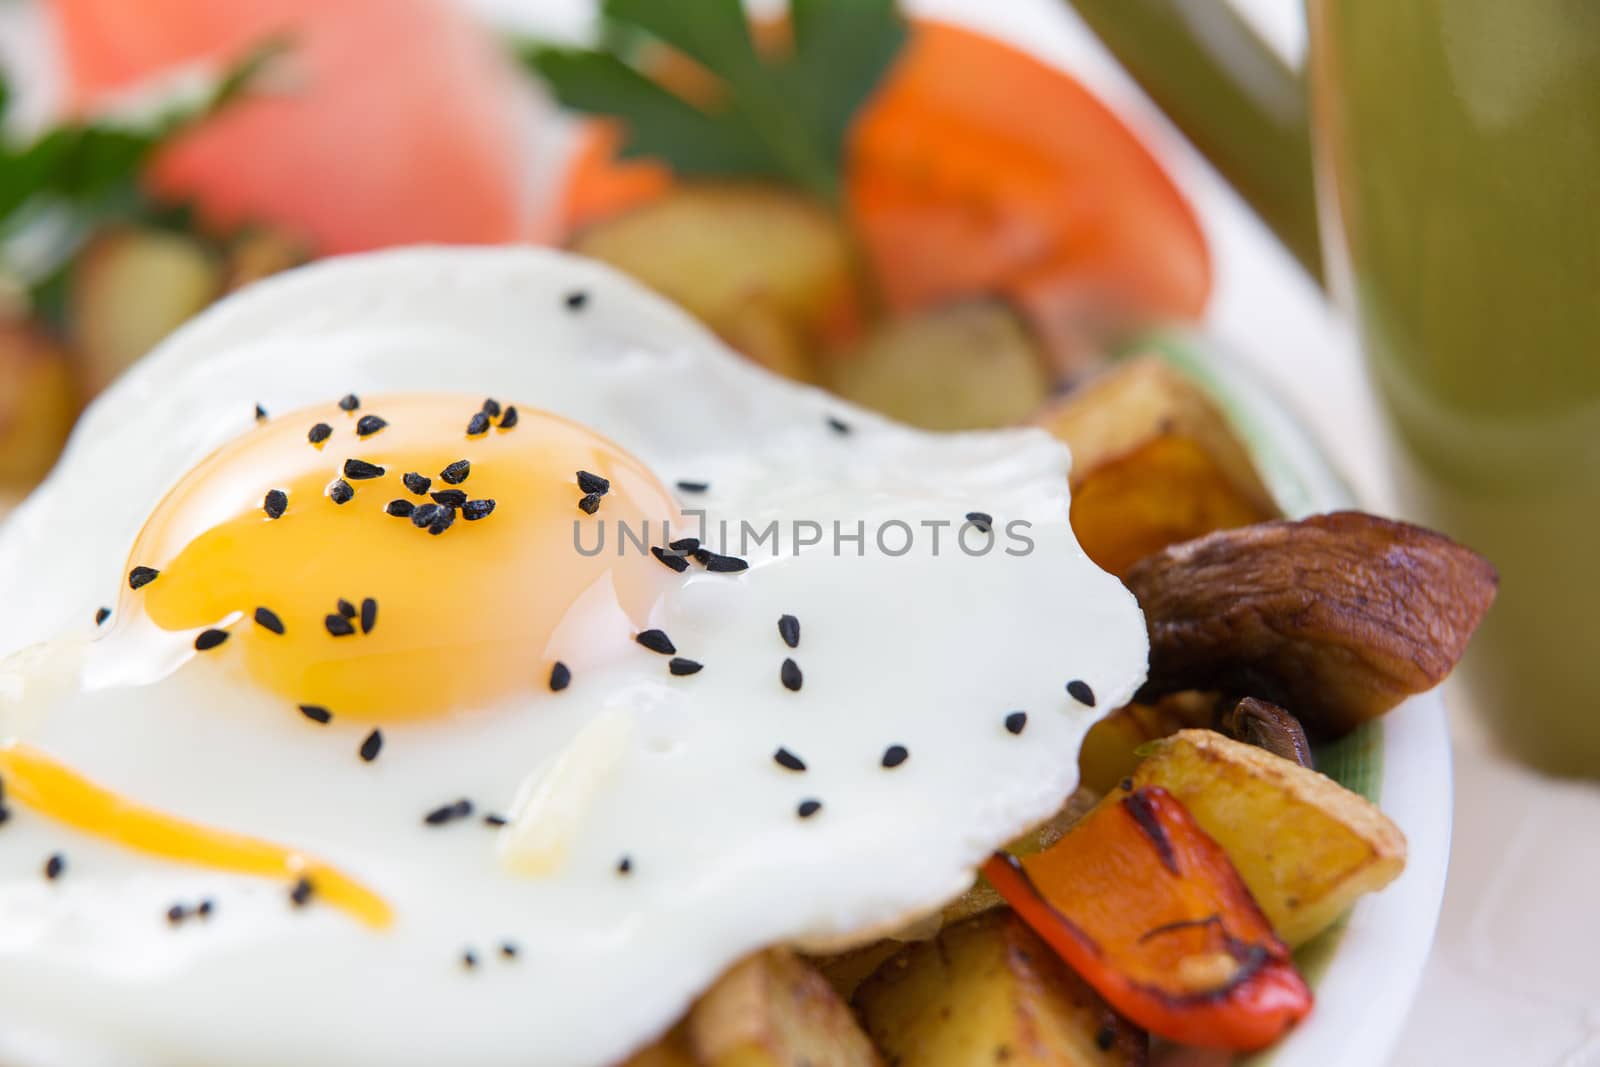 Wholesome meal of fried egg and vegetables by coskun